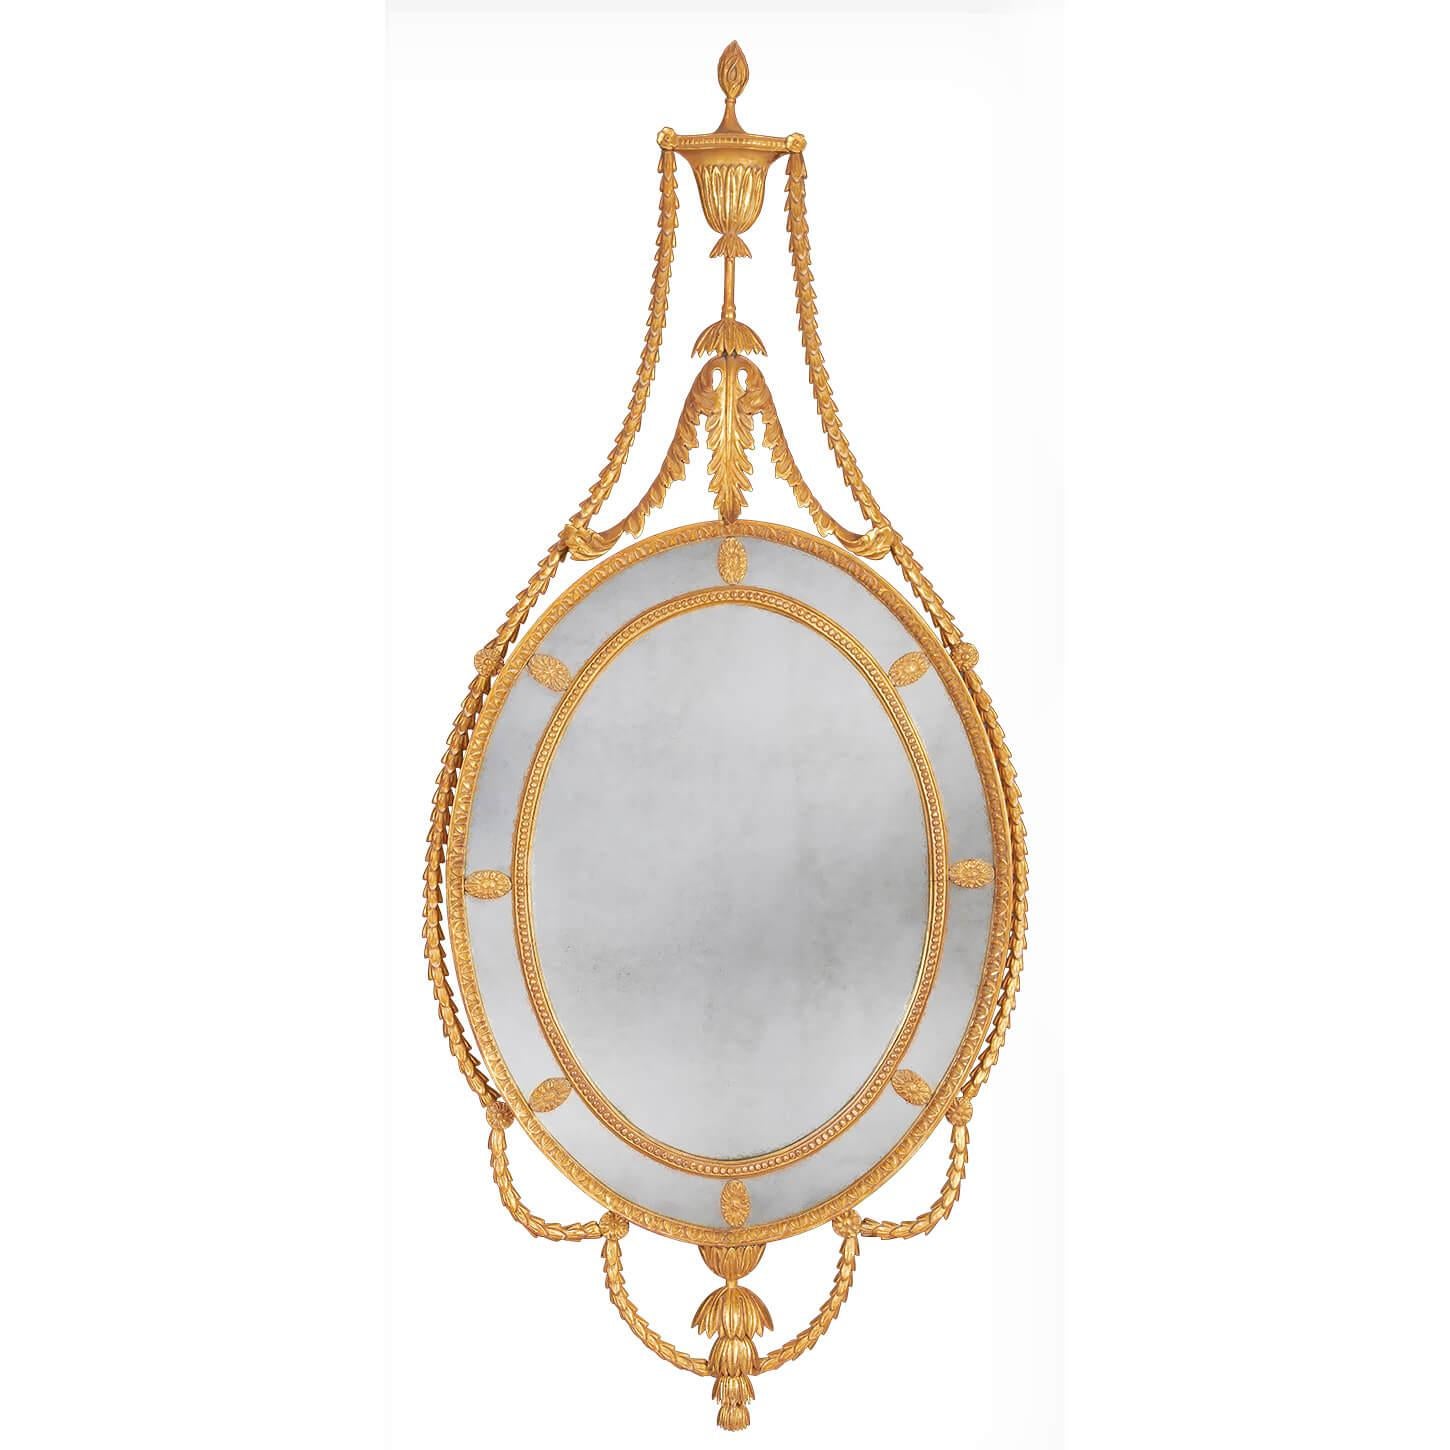 A pair of carved giltwood George III mirrors of Adam design with leaf carved outer frame and bead carved inner frame, the surrounding border glasses are punctuated by oval flower-head paterae. The cresting formed of a classical urn. The flame finial